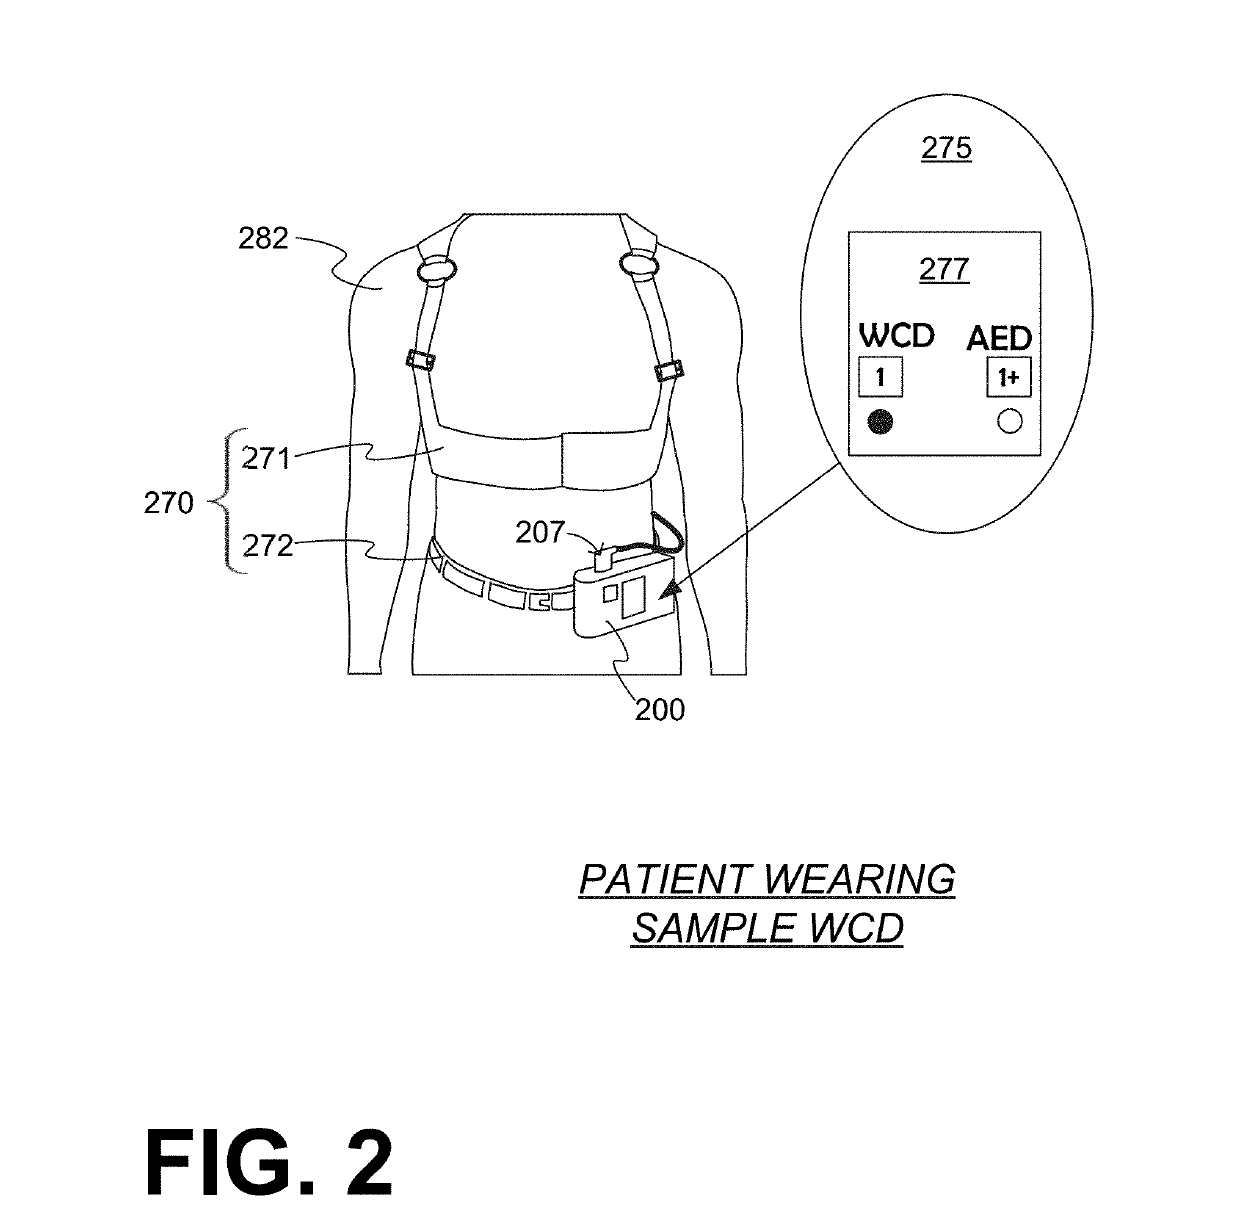 Wearable cardioverter defibrillator (WCD) system having wcd mode and also aed mode